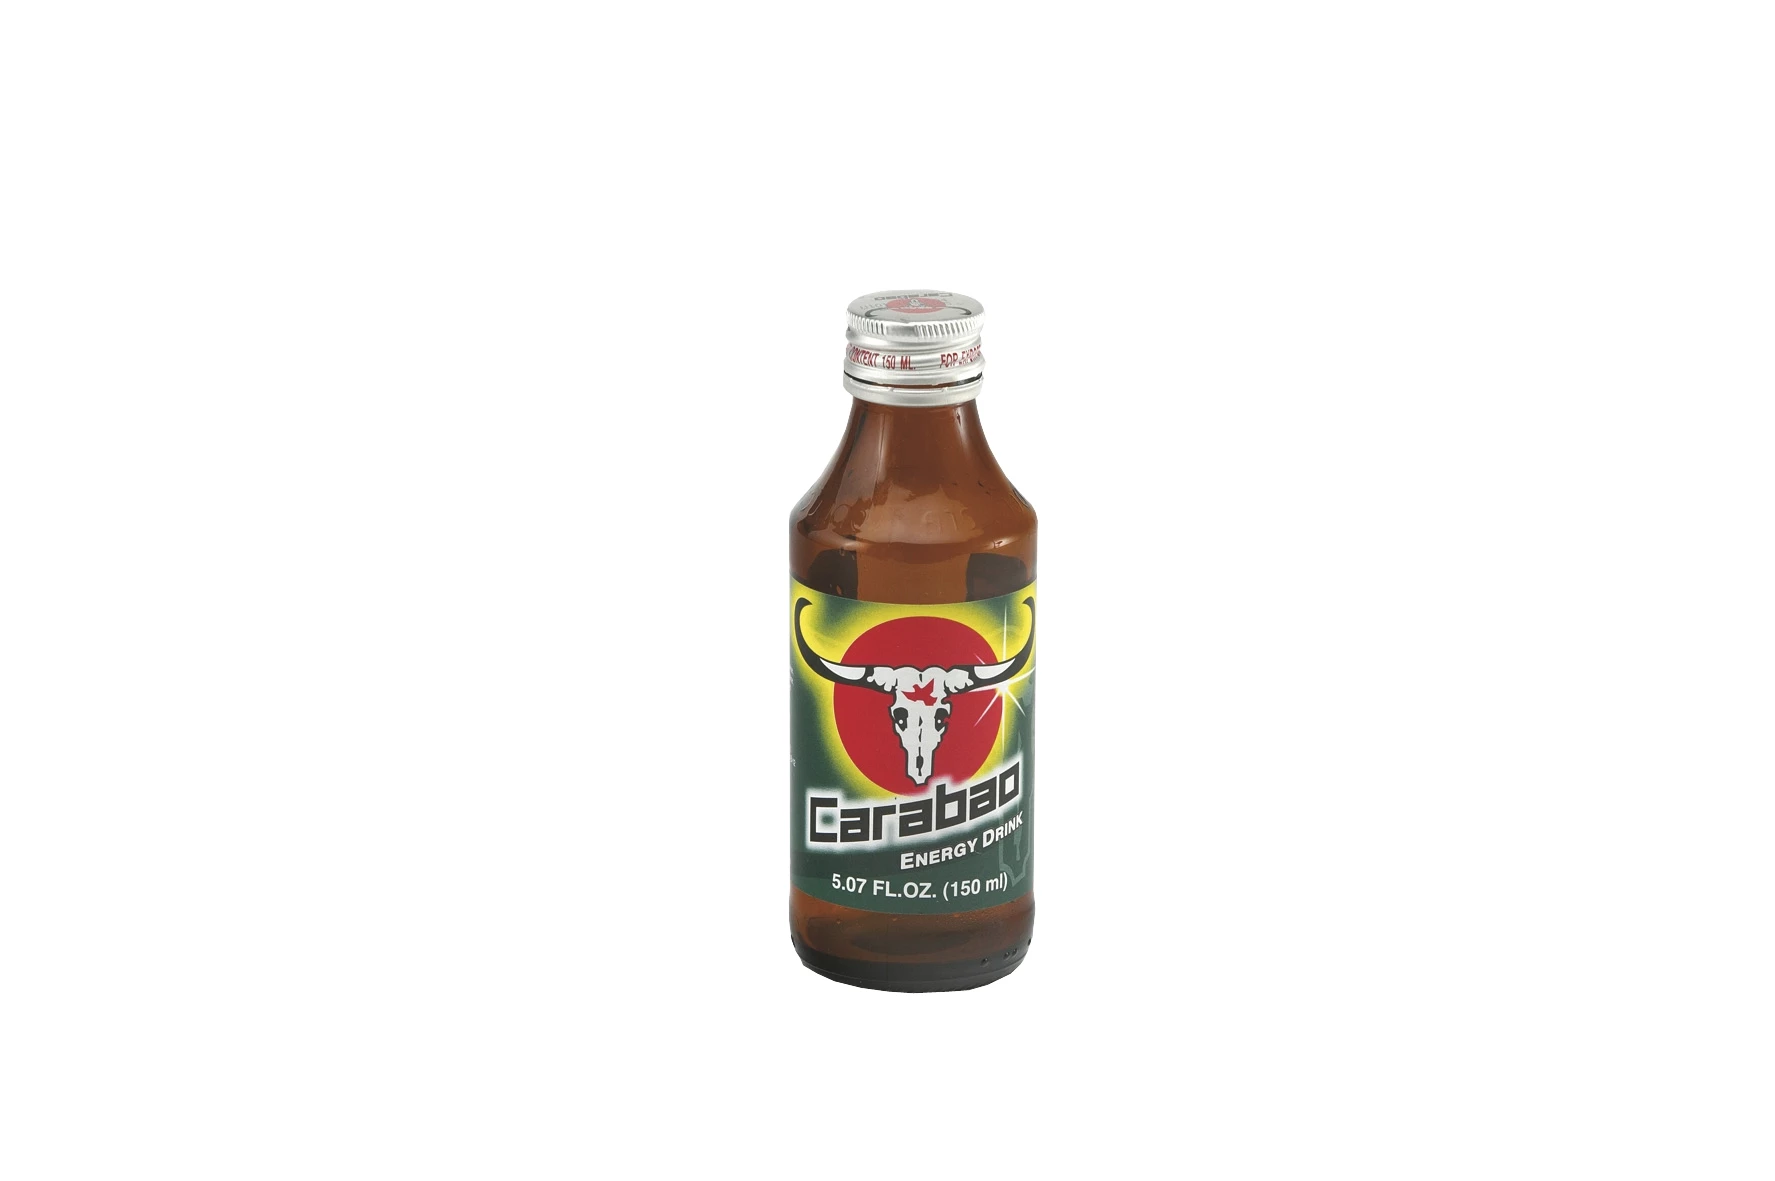 Carbonated Energy Drink. 50 X 150 Ml - Carabao